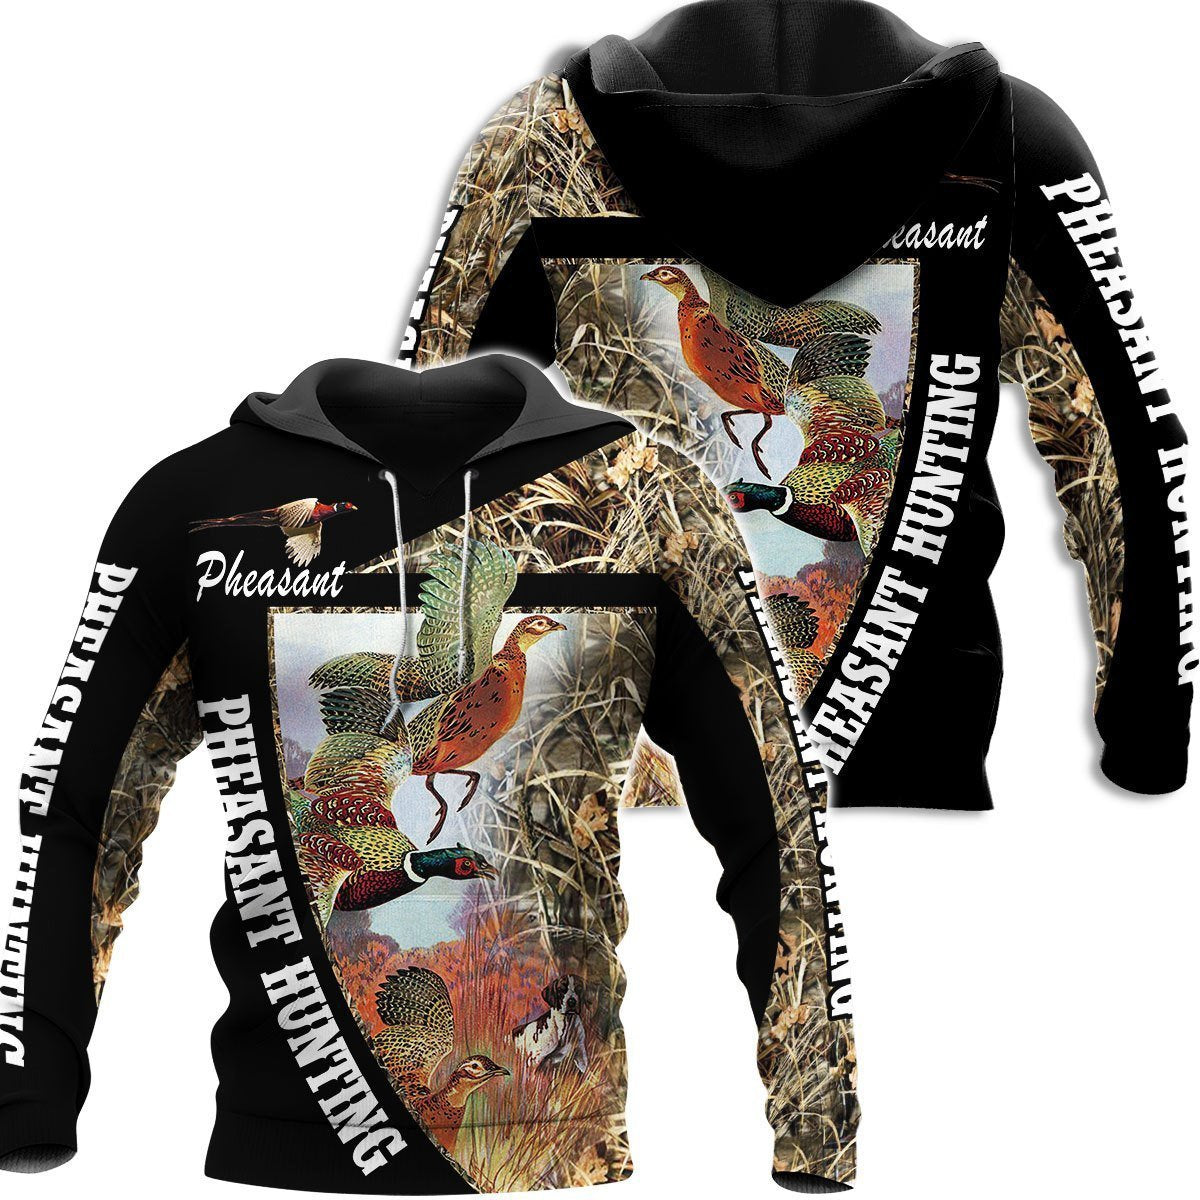 Pheasant Hunting 3D All Over Printed Shirts For Men And Women MP984 - Amaze Style™-Apparel